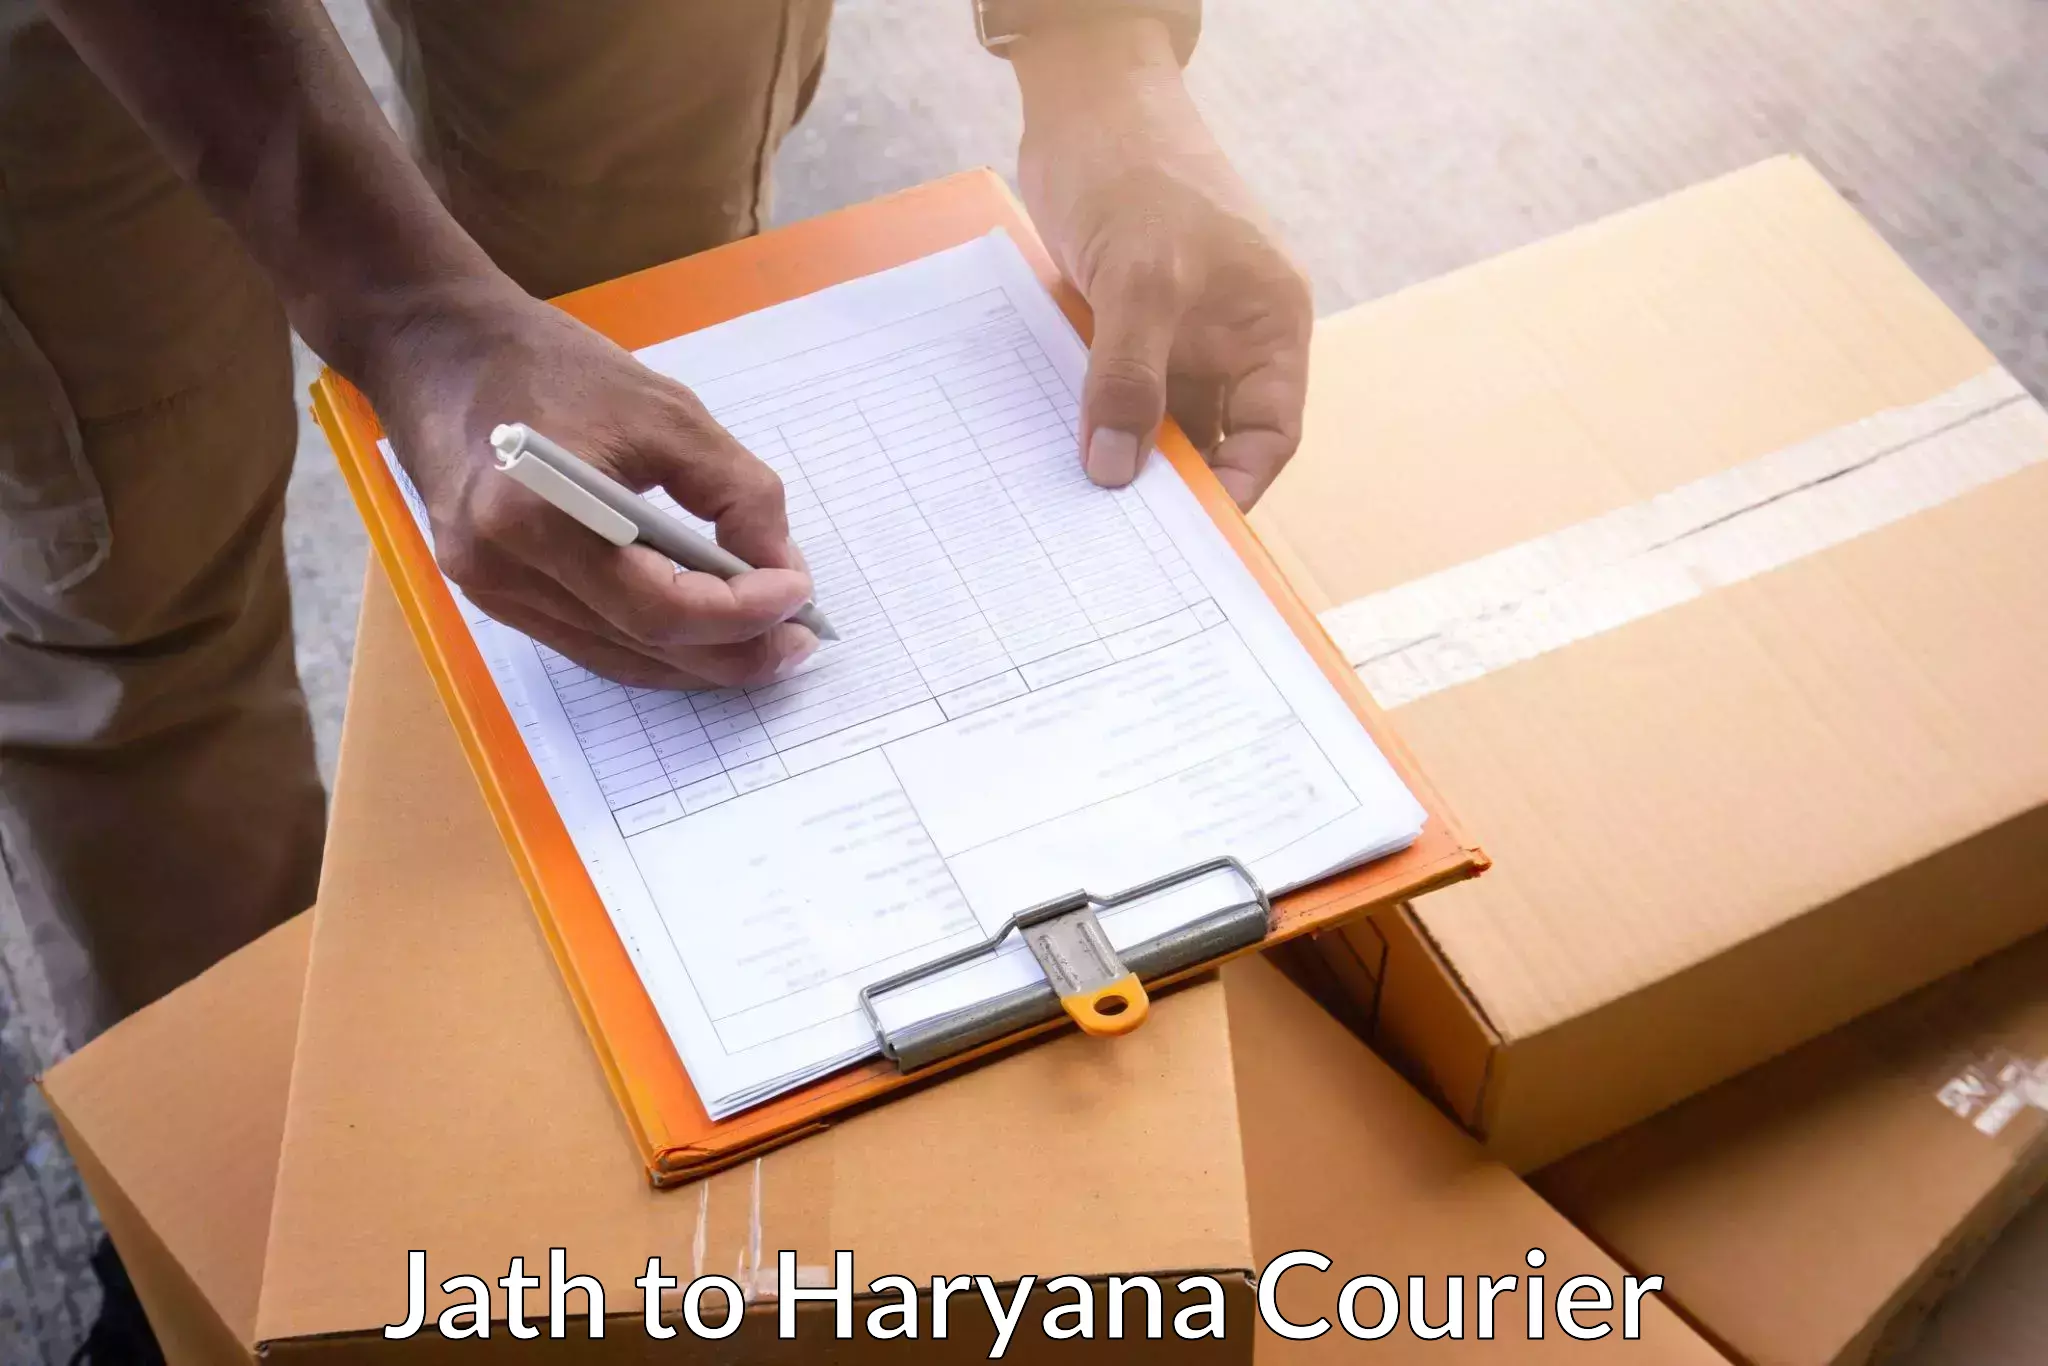 Package delivery network Jath to Hansi